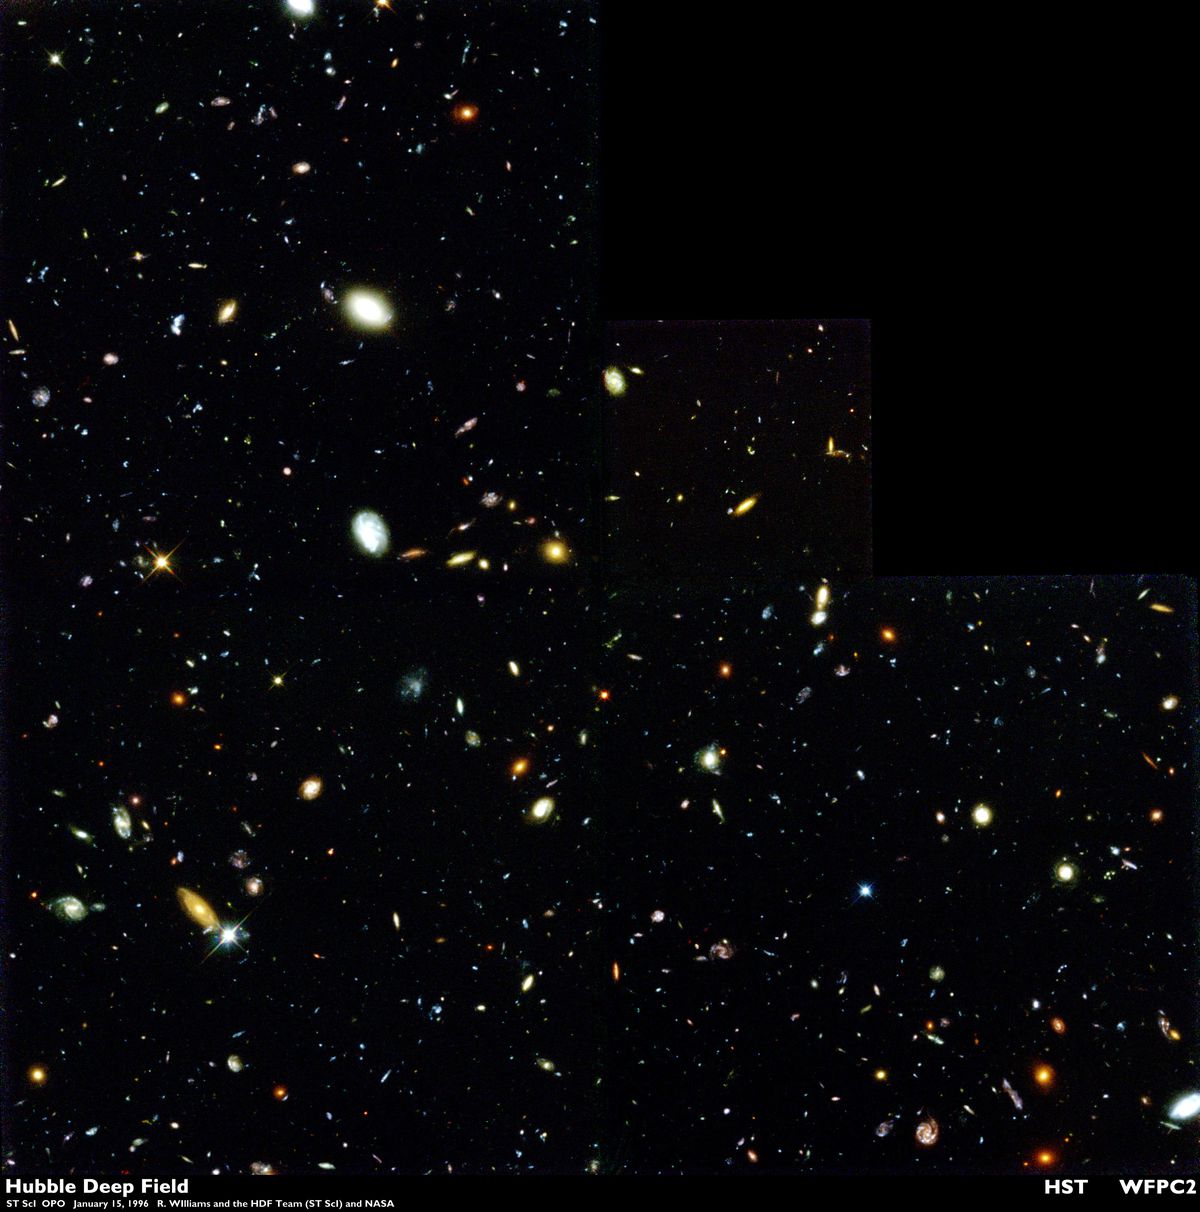 galaxies against a black background. the upper right corner is entirely black